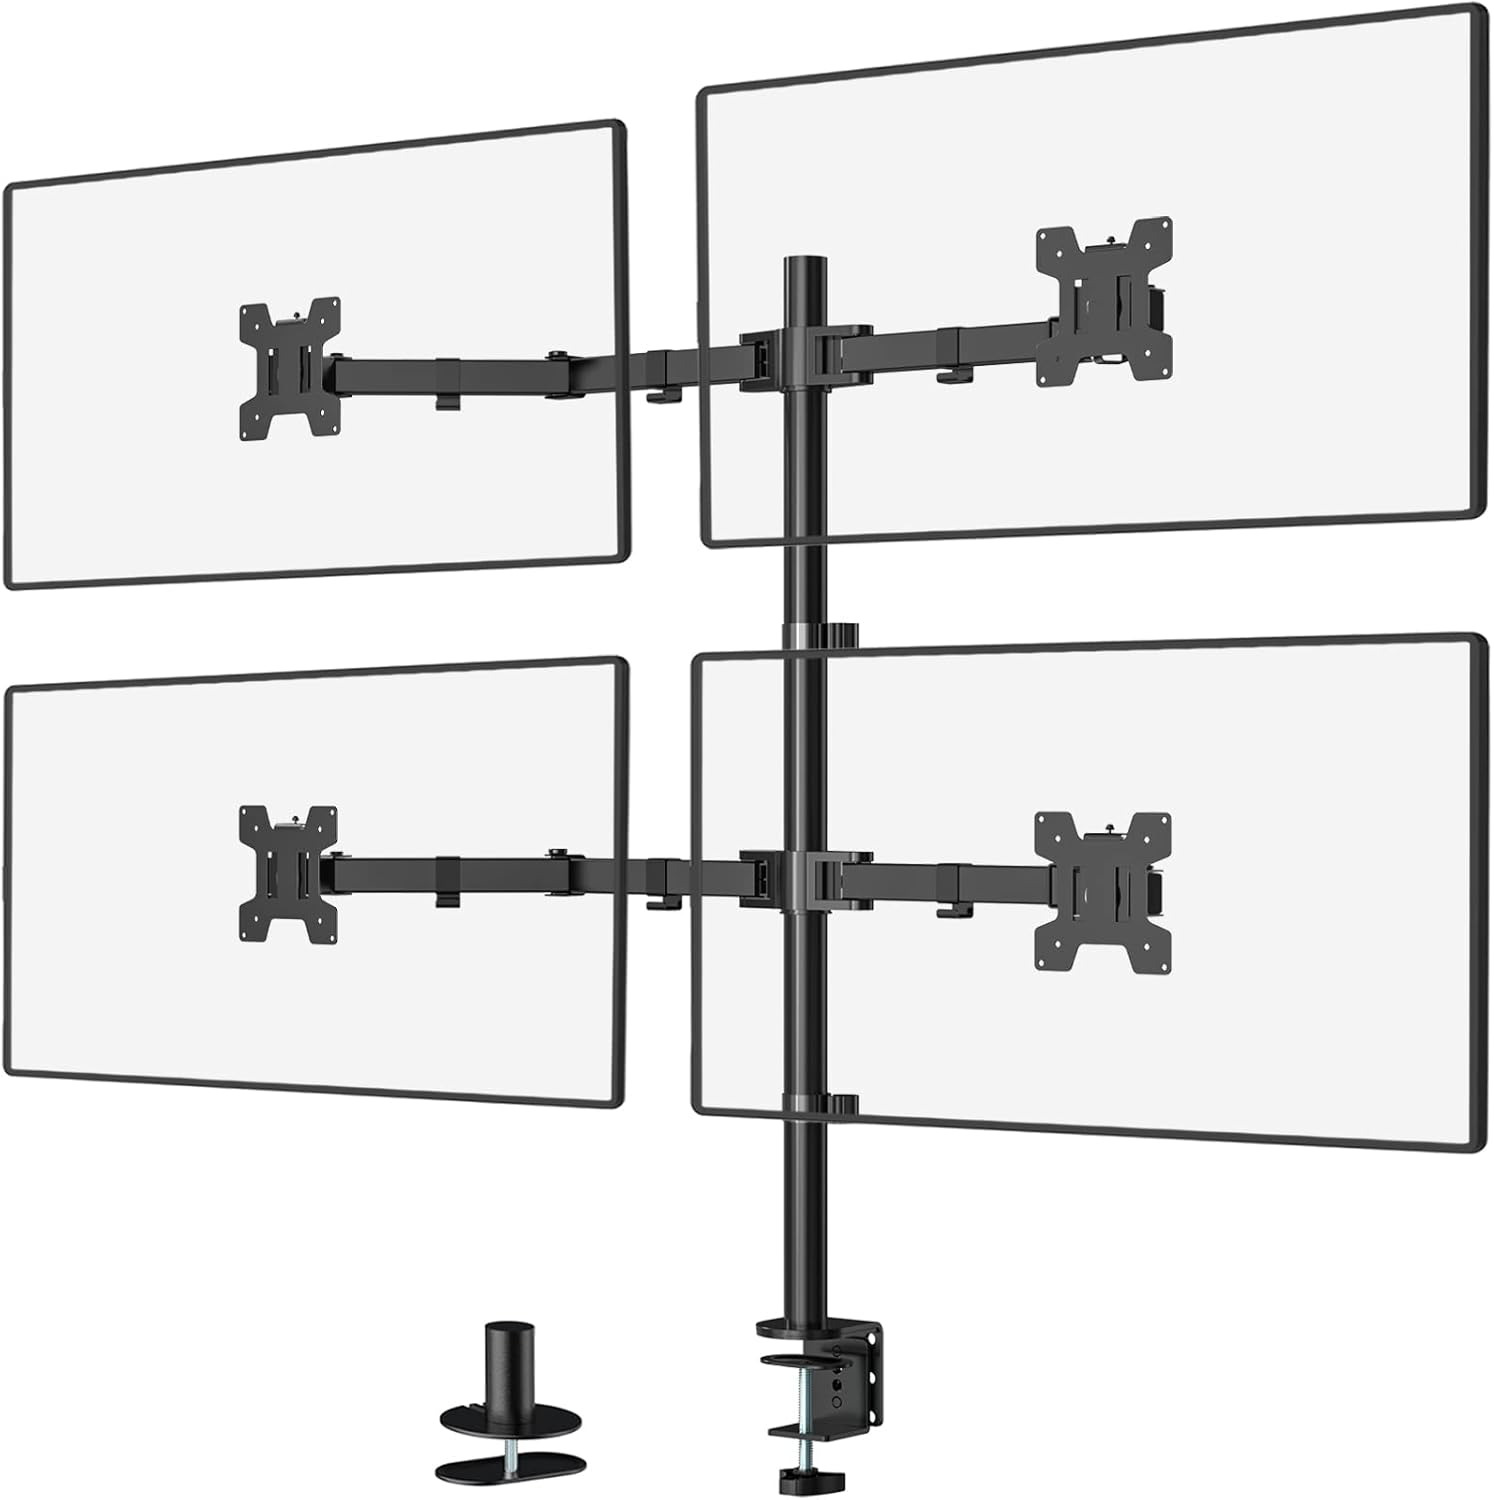 WALI Quad Monitor Desk Mount, 4 Monitor Stand Fits Heavy Duty Computer Screen up